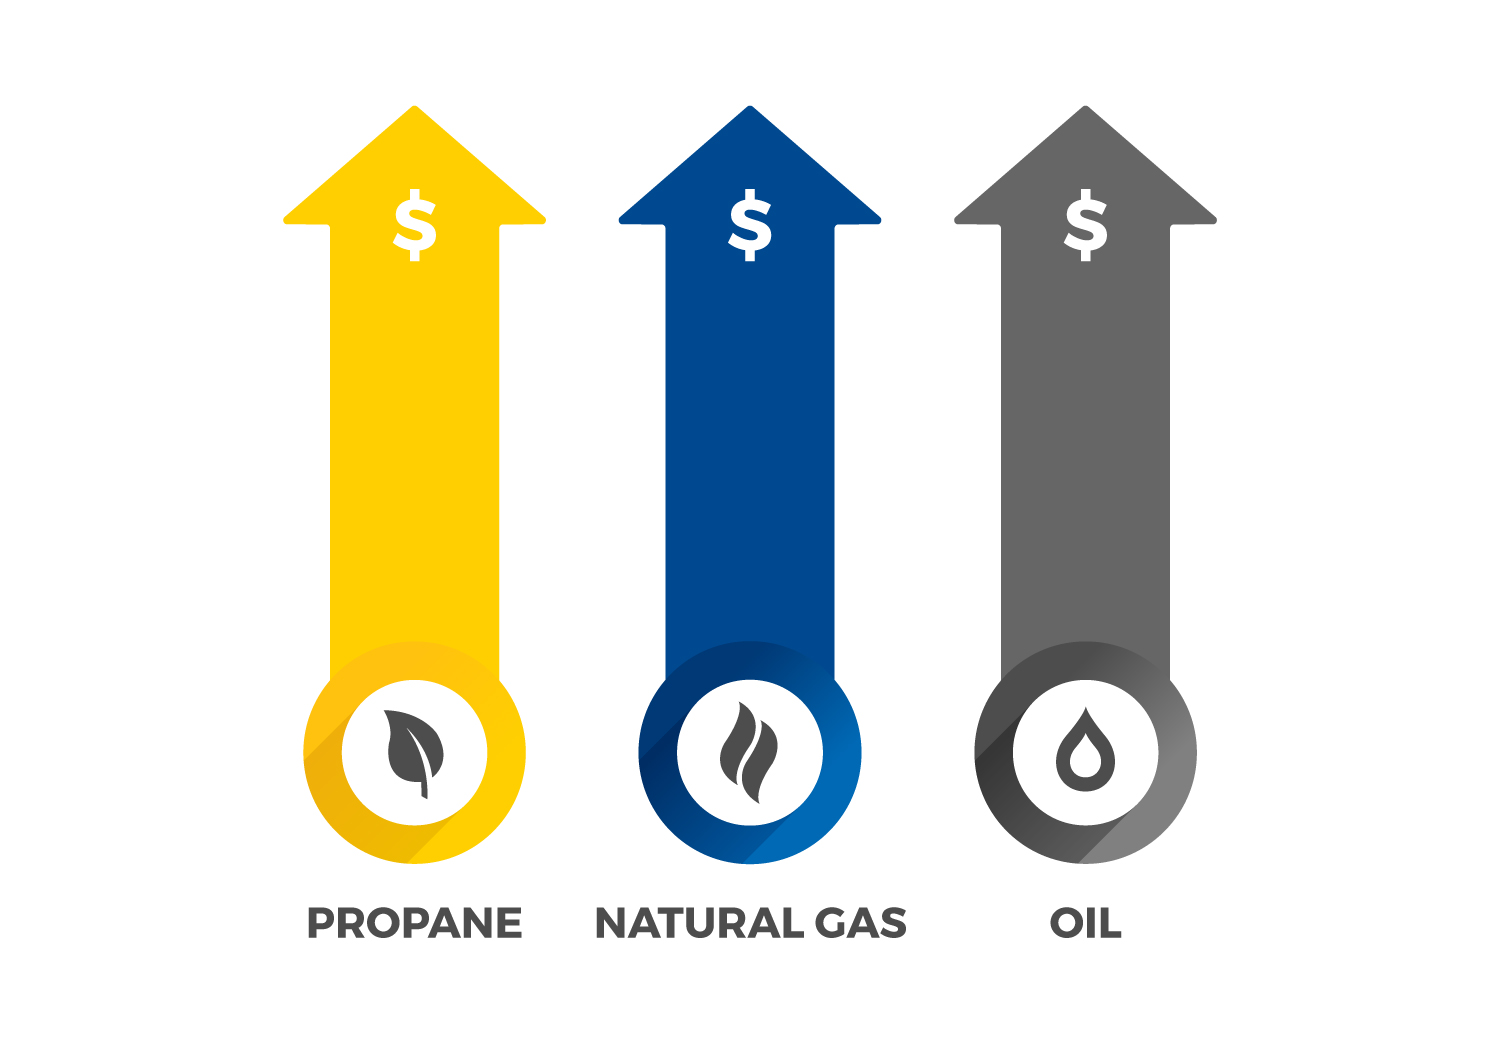 Propane, natural gas and oil prices are rising